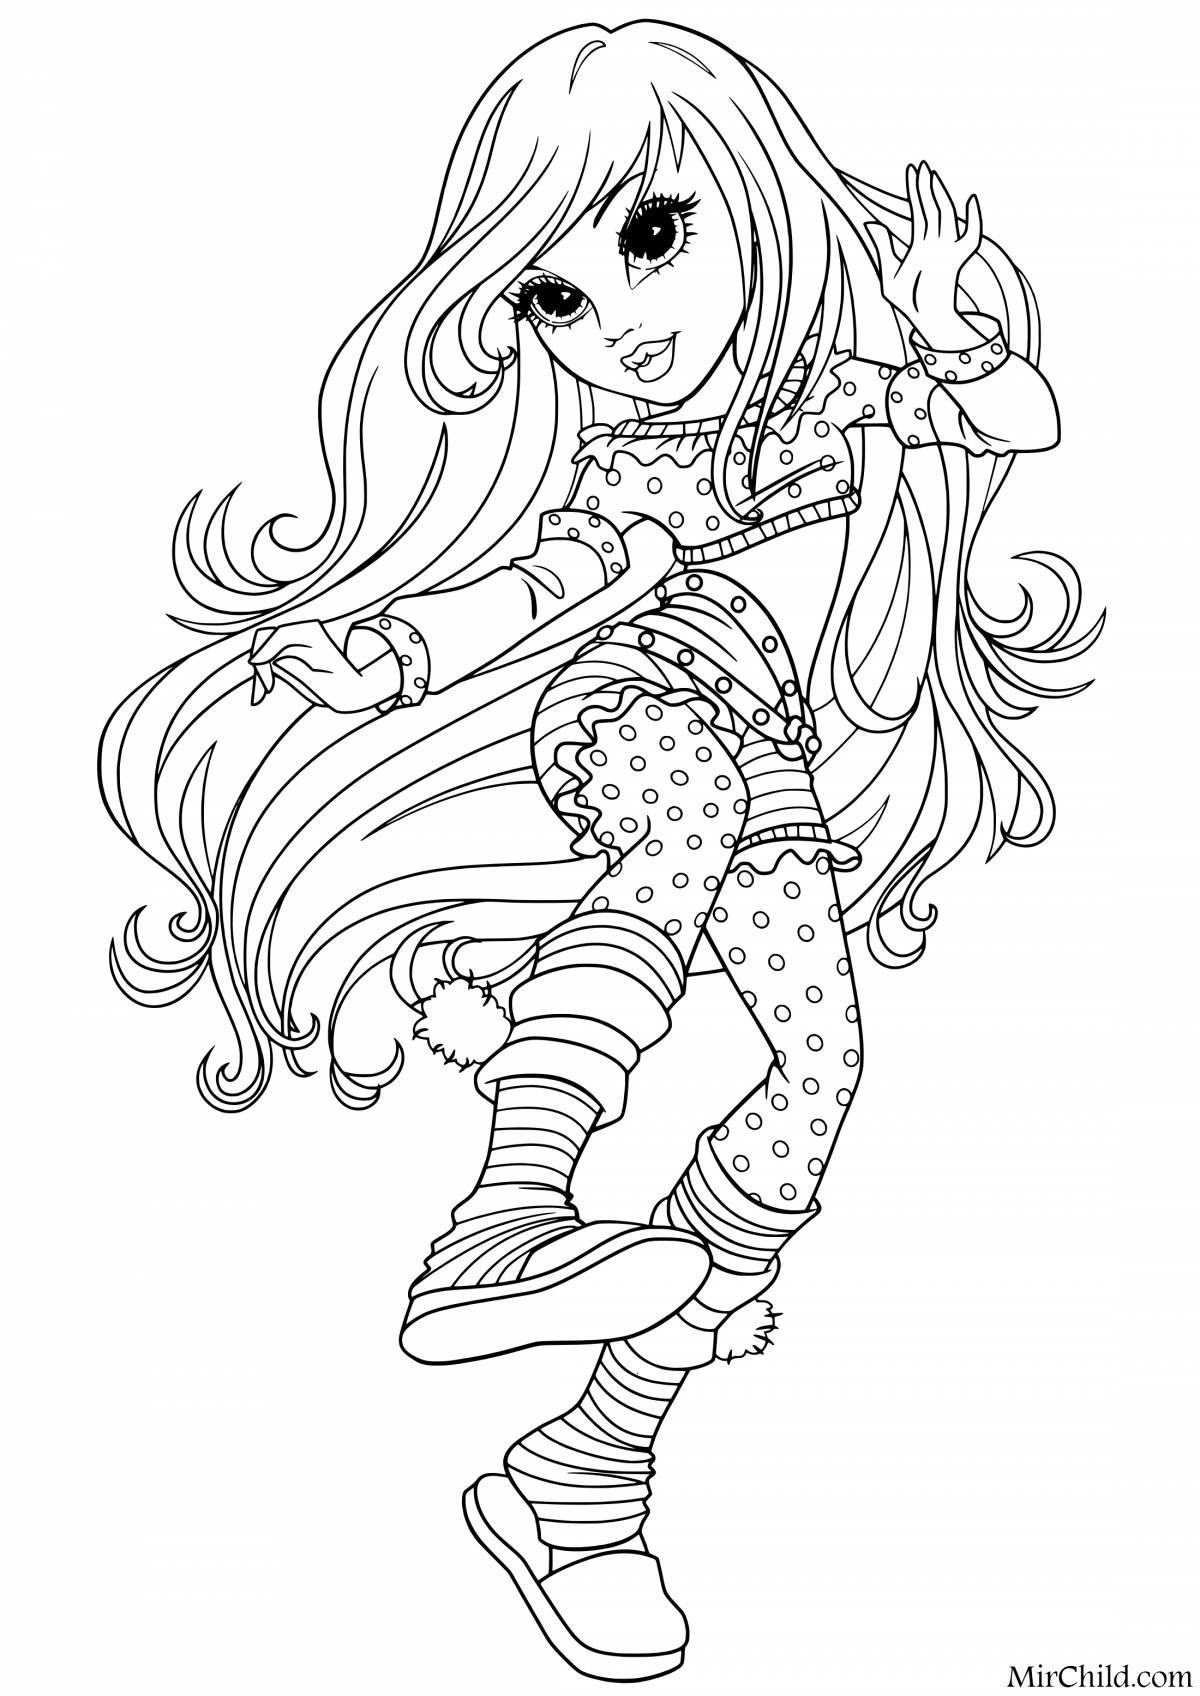 Cute coloring pages for girls 10 years old